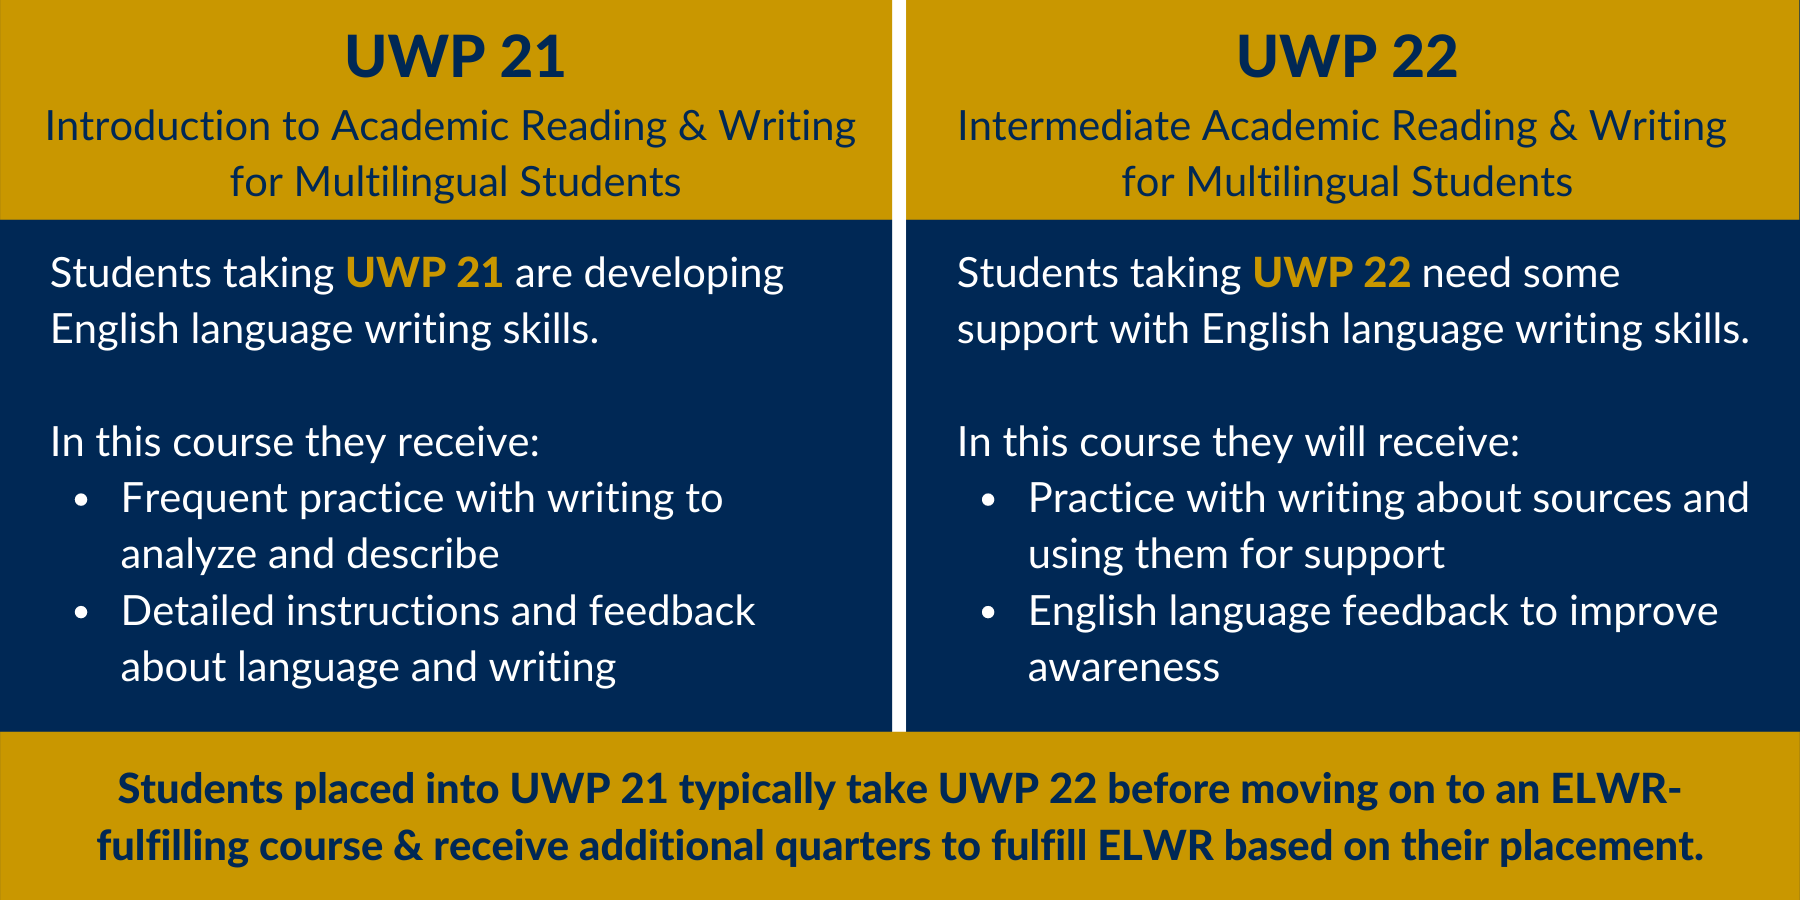 A chart with information about the different course options in the Pre-ELWR Multilingual Pathway, which includes UWP 21 and UWP 22.